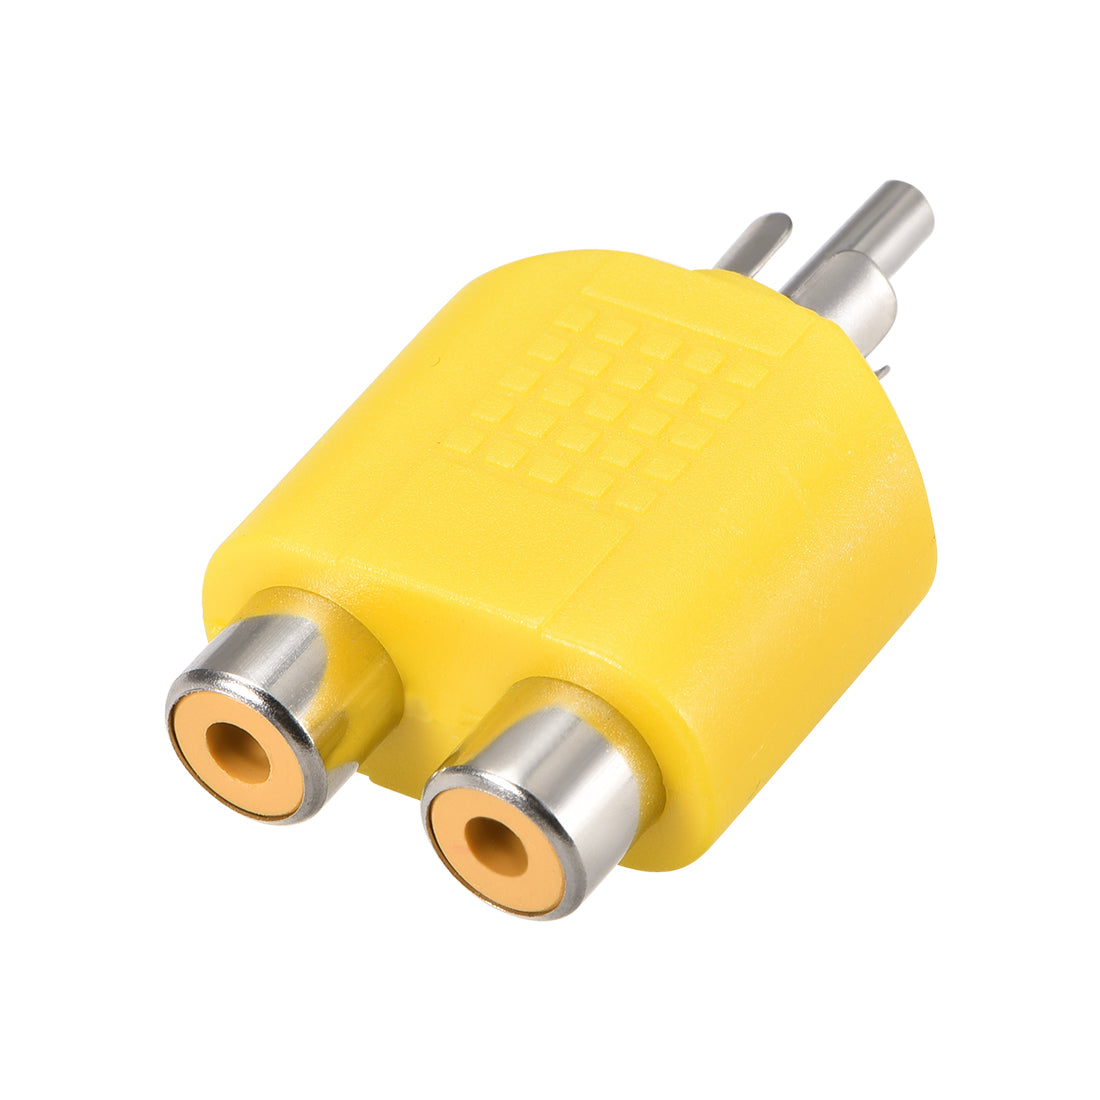 uxcell Uxcell RCA Male to 2 RCA Female Connector Splitter Adapter Coupler Yellow for Stereo Audio Video AV TV Cable Convert